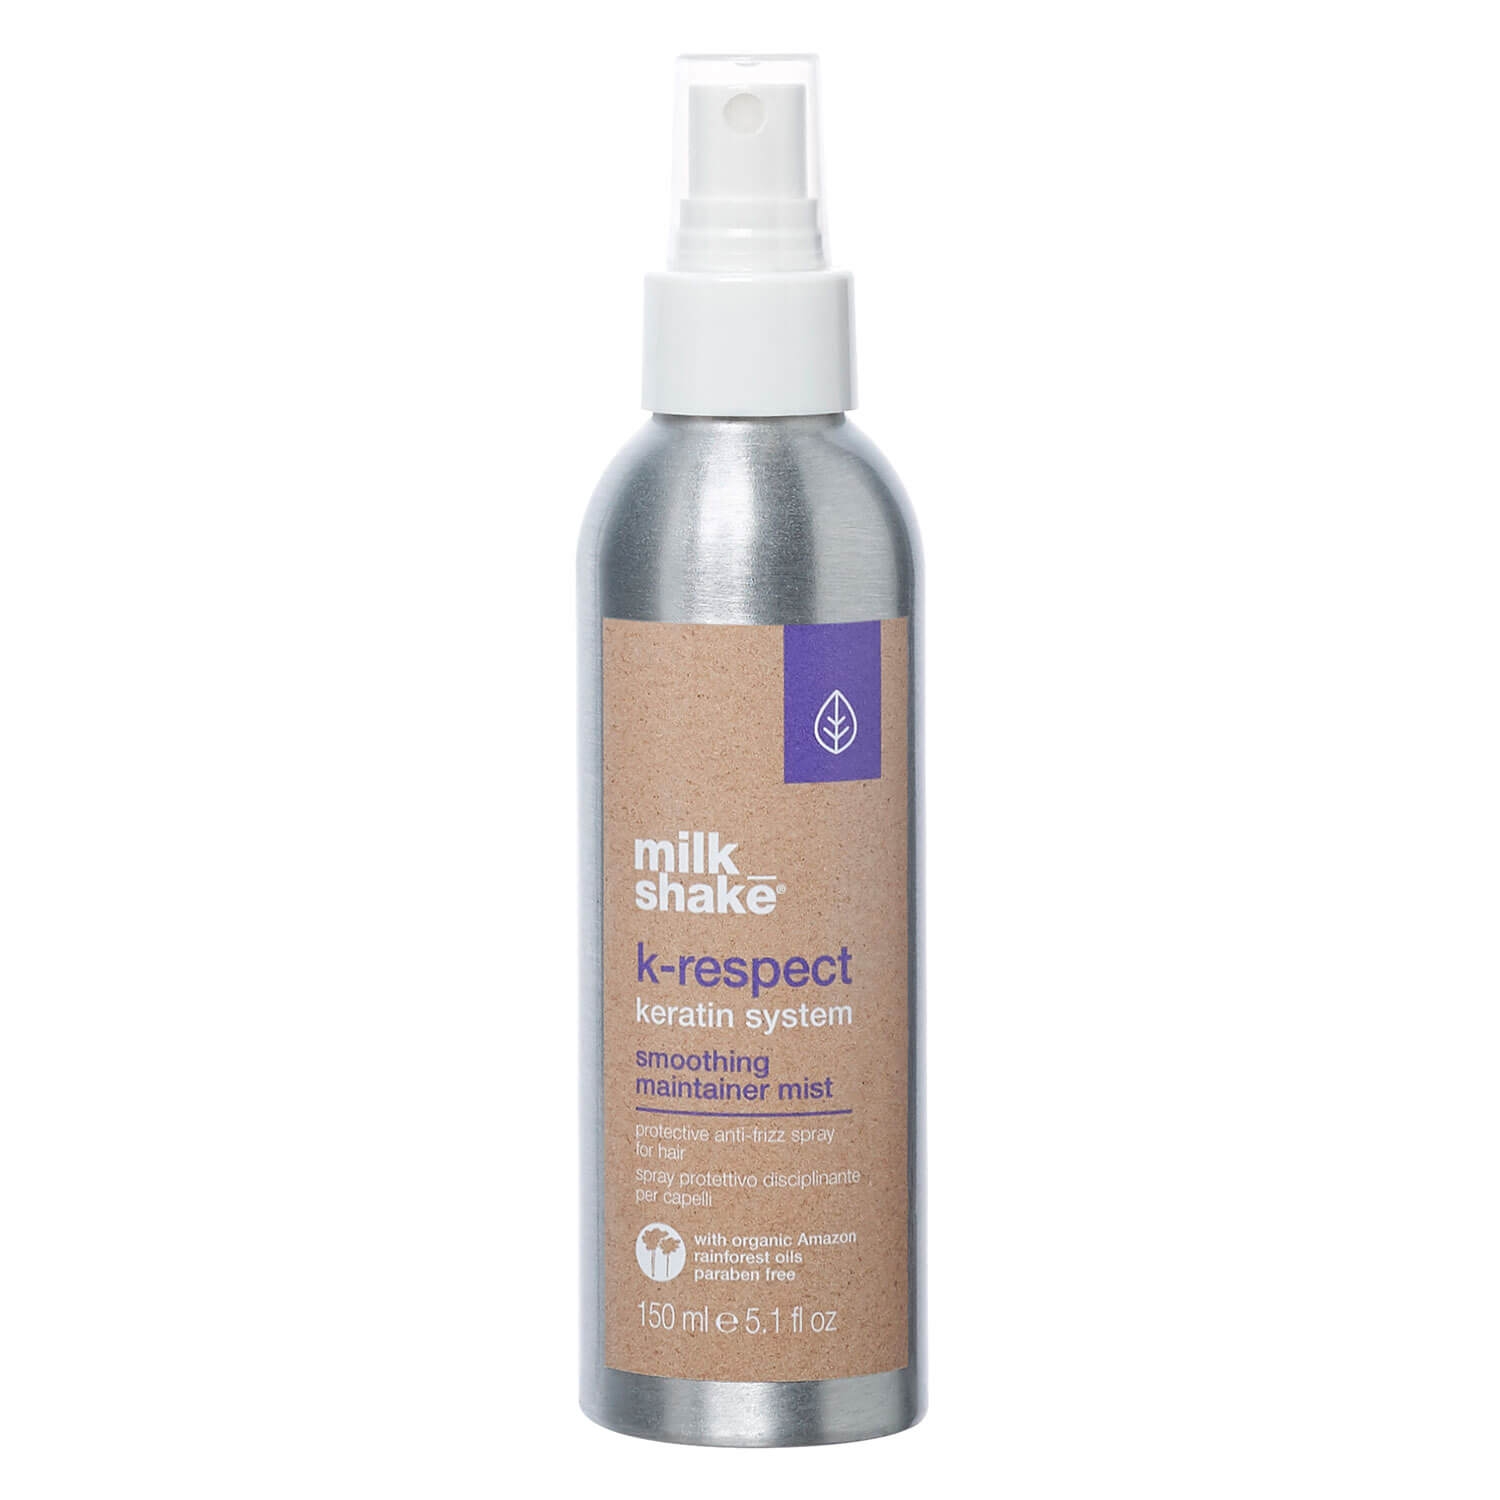 Product image from milk_shake k-respect - smoothing maintainer mist